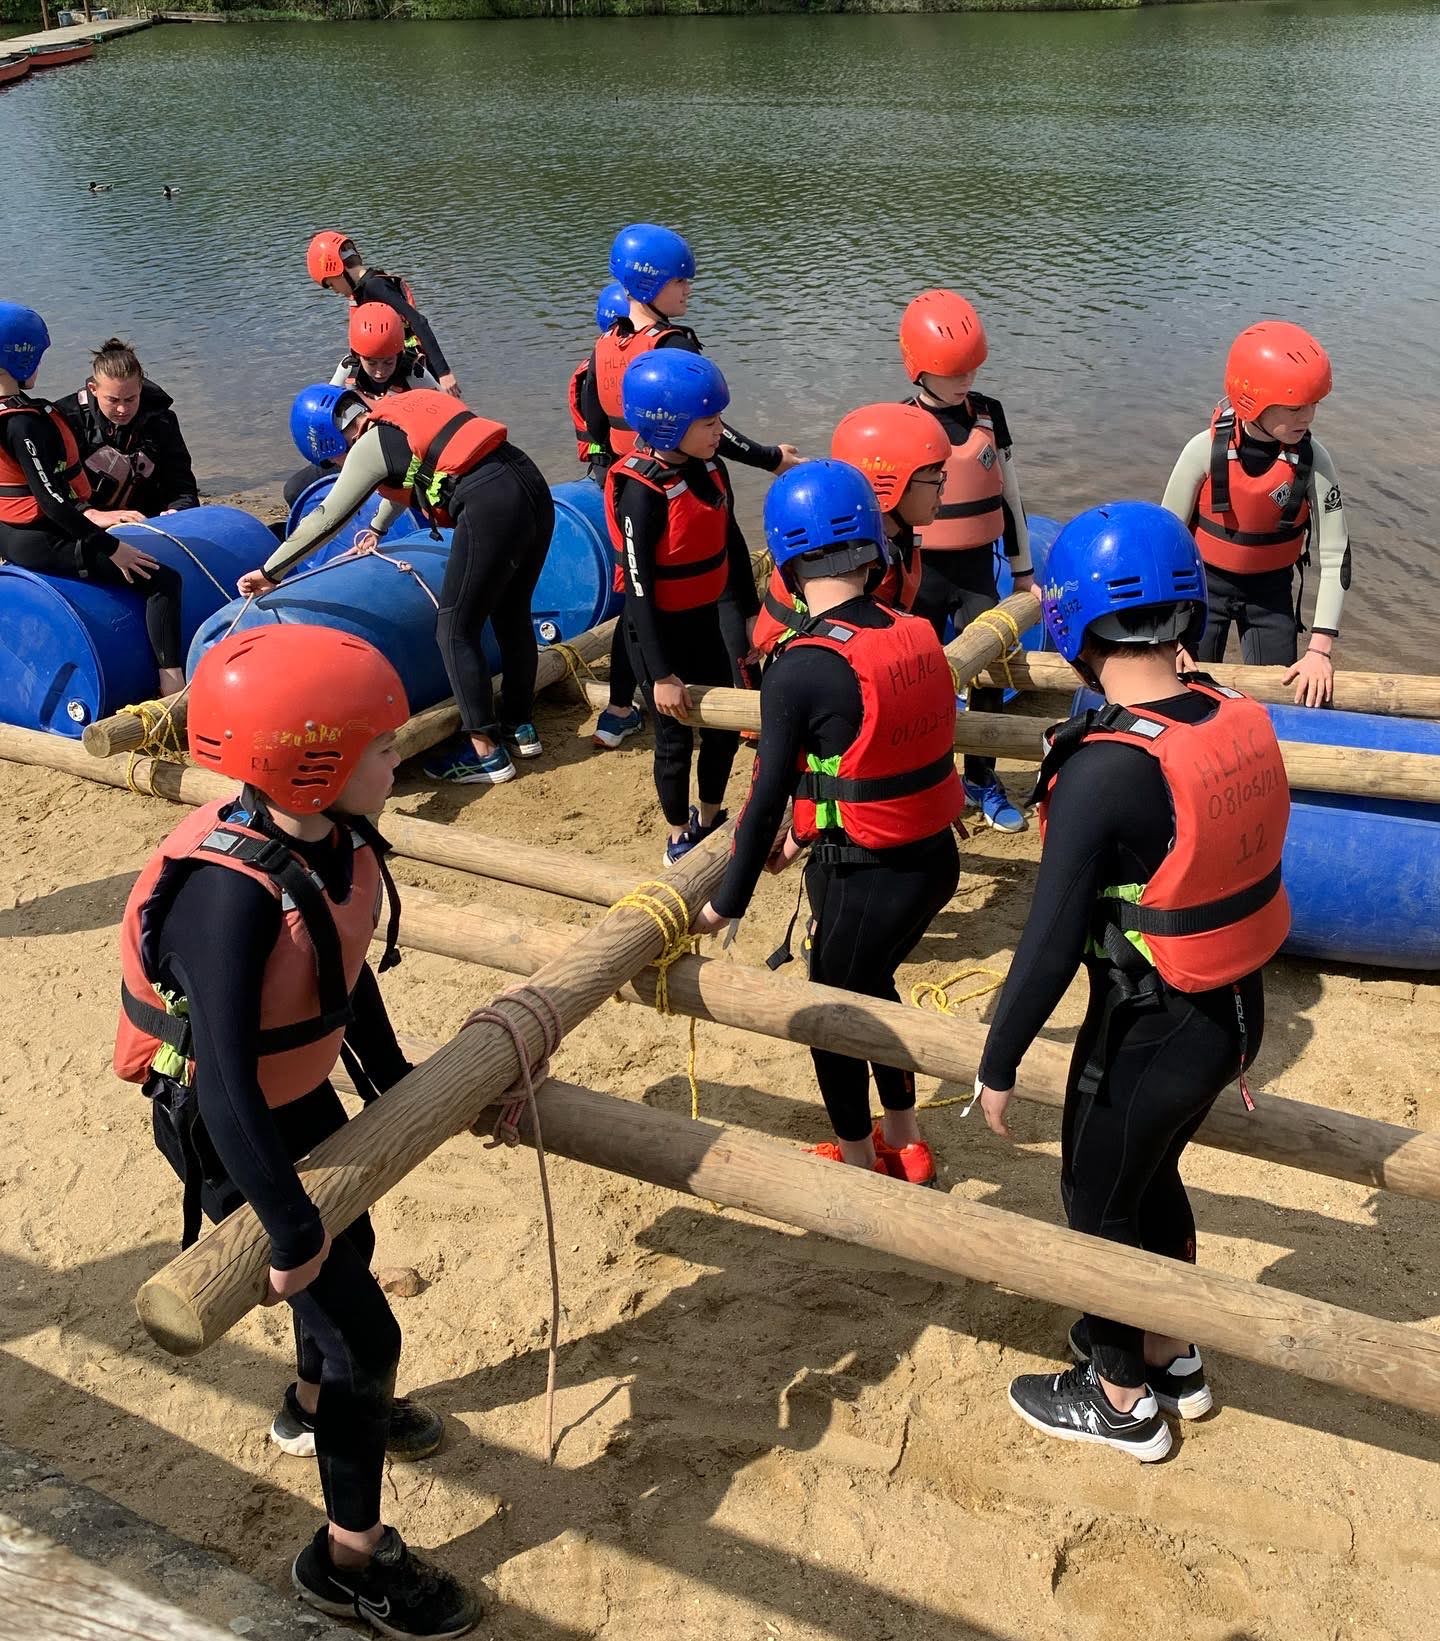 Ludgrove boys ready to launch their raft